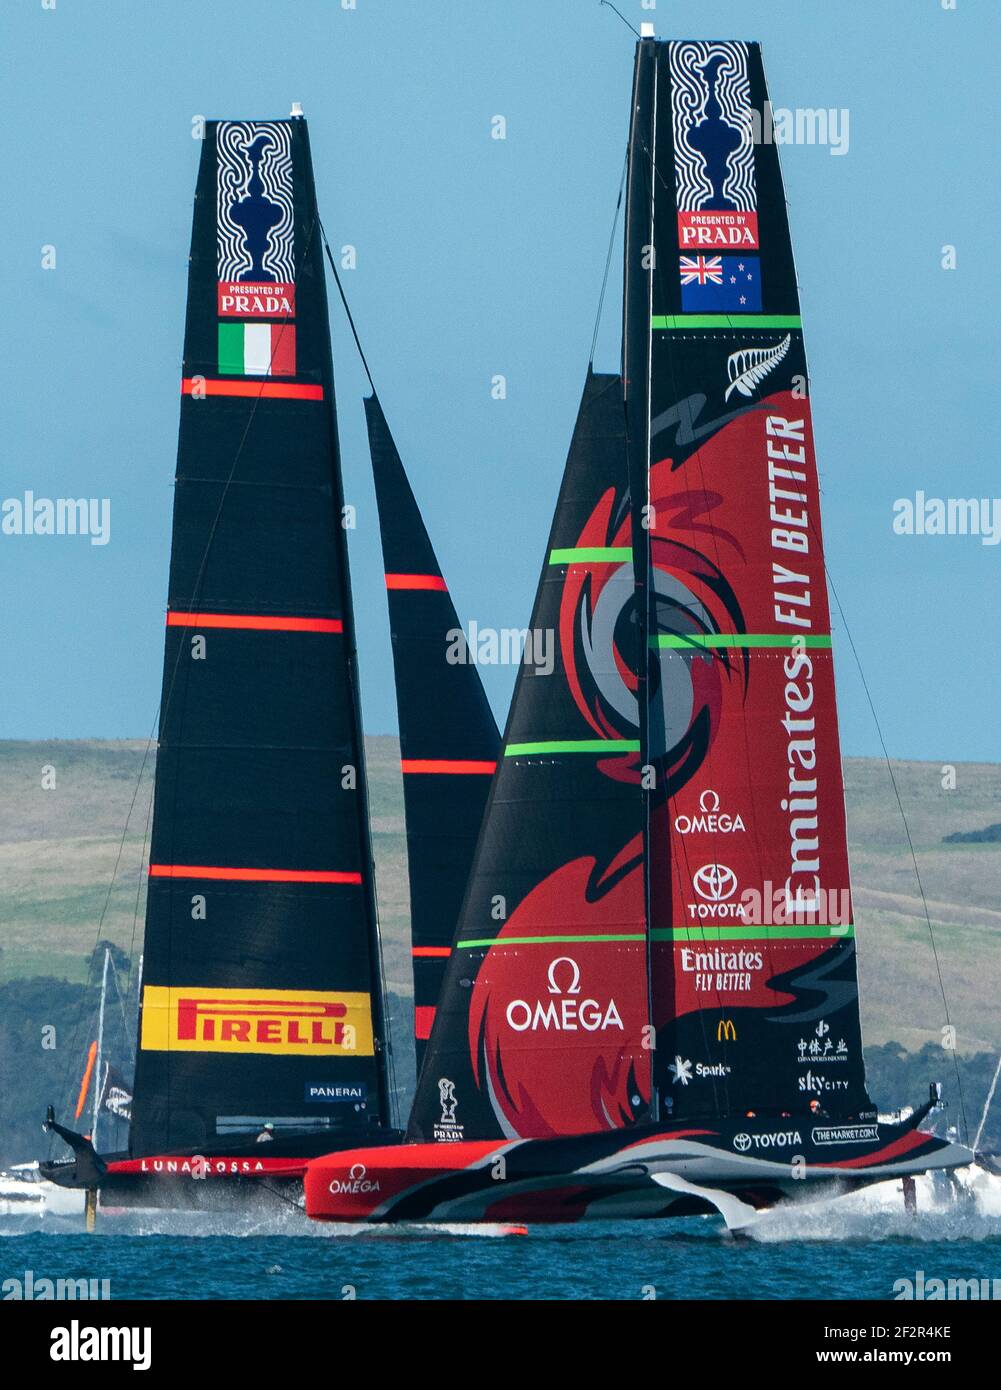 Auckland, New Zealand, 13 March, 2021 -  Defender's  Emirates Team New Zealand (ETNZ), skippered by Peter Burling on Te Rehutai and Italian challengers Luna Rossa Prada Pirelli, co-helmed by Jimmy Spithill and Francesco Bruni on Luna Rossa, during Day 3, Race 5, of the 36th America's Cup.  Credit: Rob Taggart/Alamy Live News Stock Photo